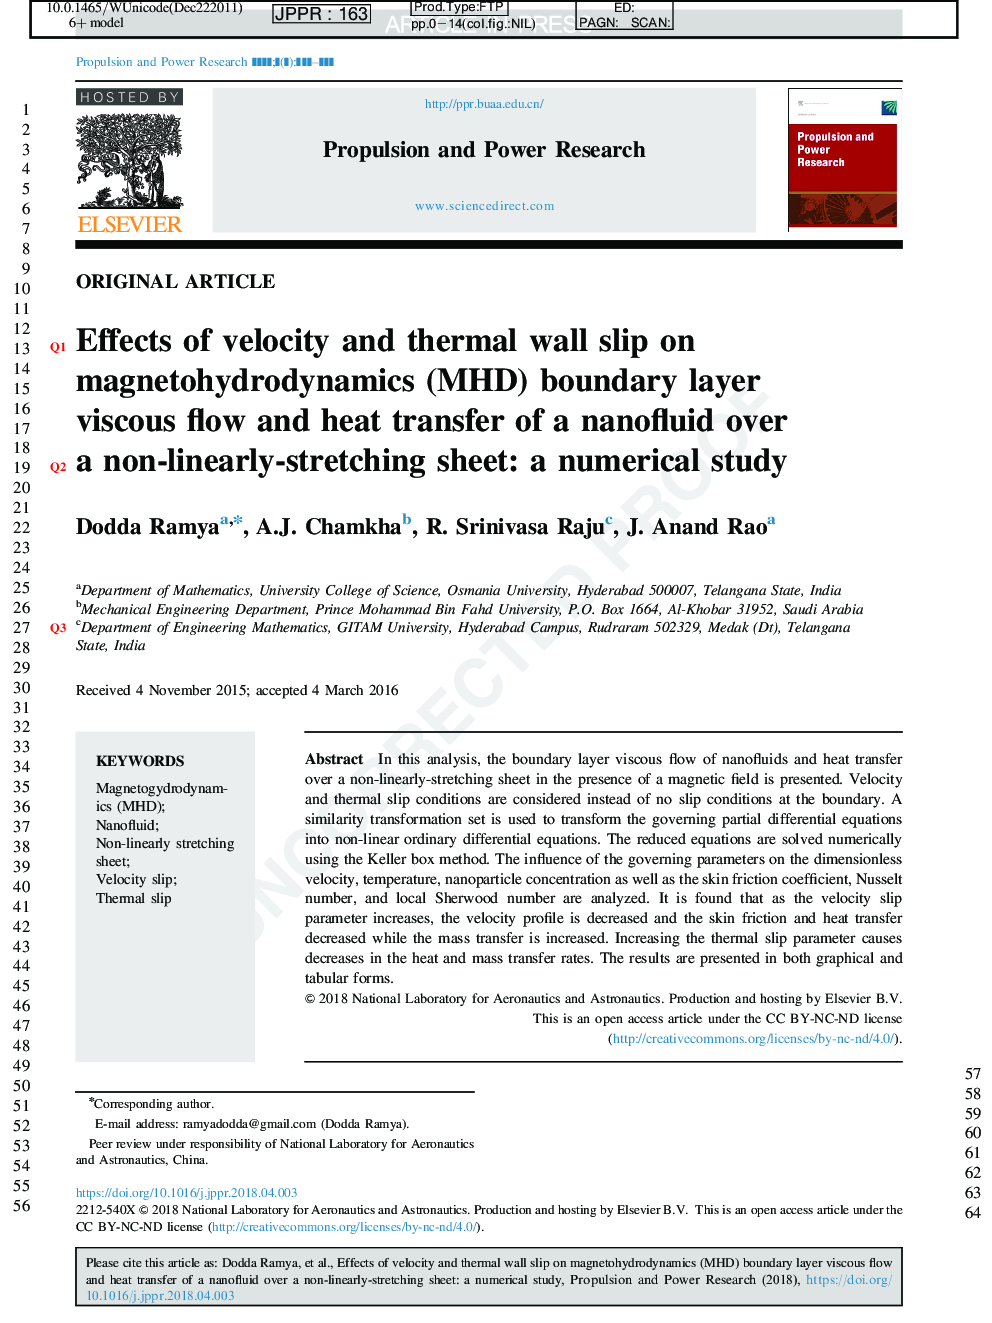 Effects of velocity and thermal wall slip on magnetohydrodynamics (MHD) boundary layer viscous flow and heat transfer of a nanofluid over a non-linearly-stretching sheet: a numerical study